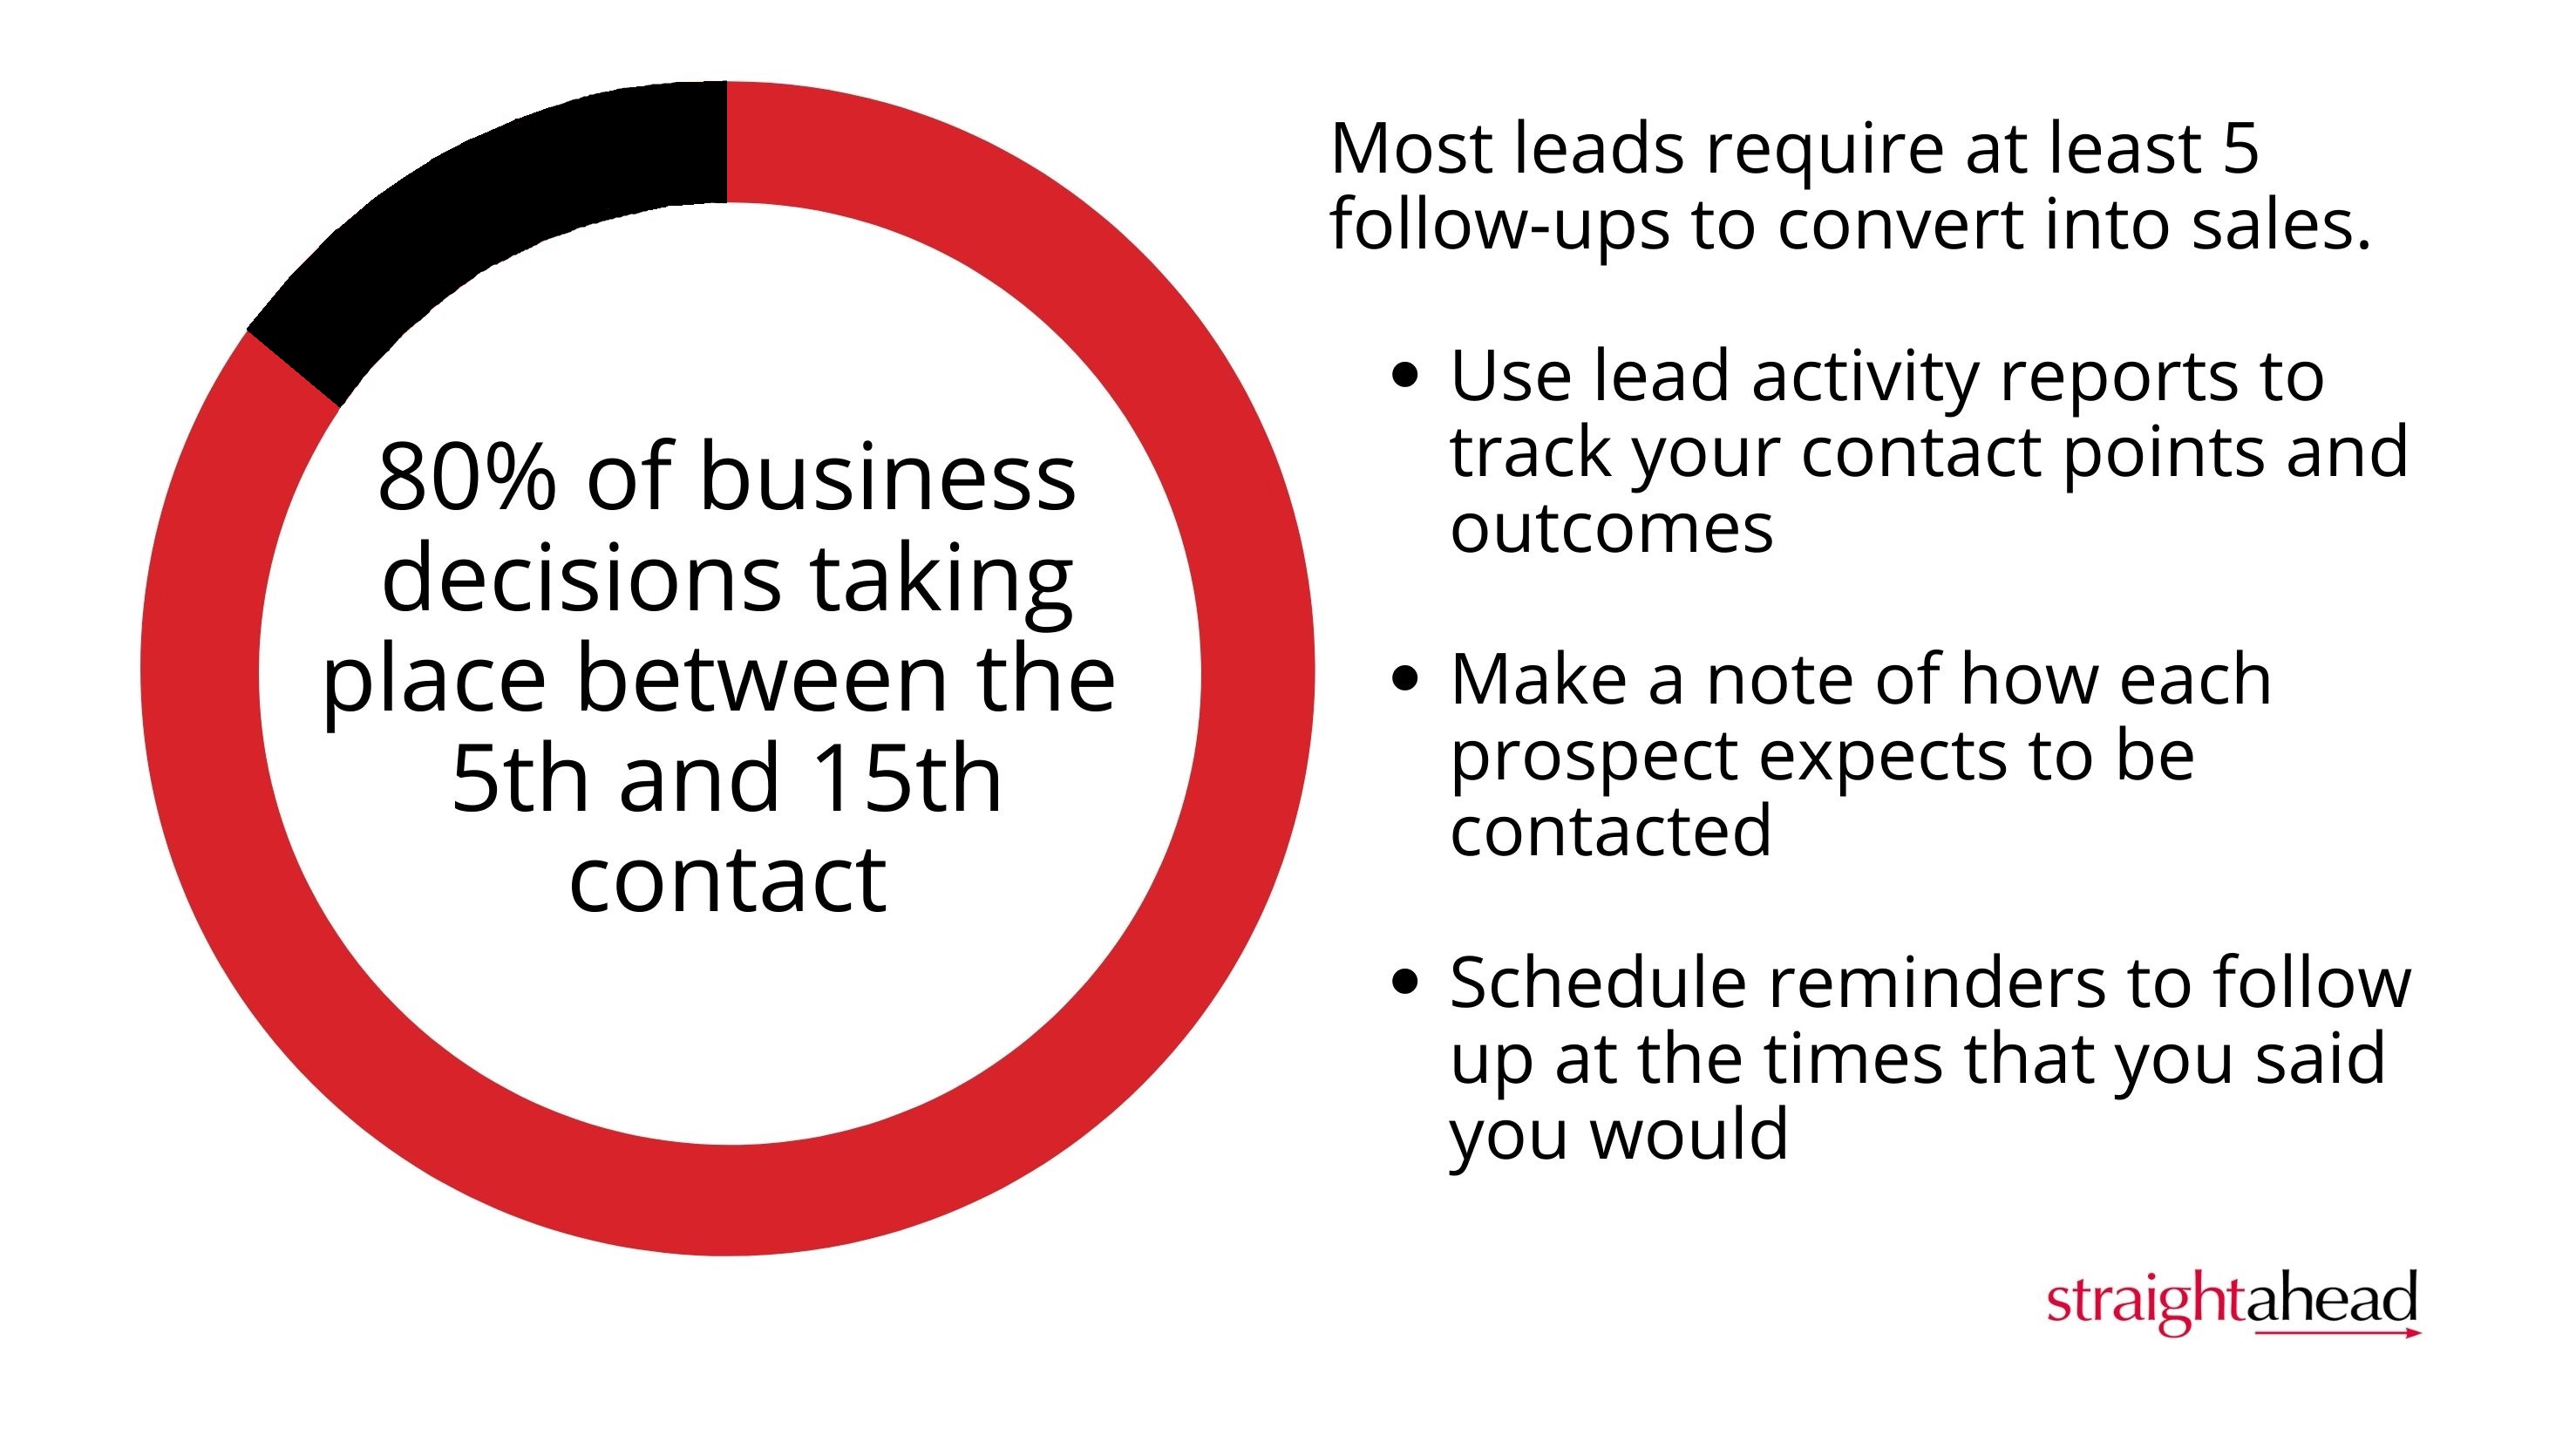 Most leads require at least 5 follow-ups to convert into sales. Use lead activity reports to track your contact points and outcomes. Make a note of how each prospect expects to be contacted. Schedule reminders to follow up at the times that you said you would